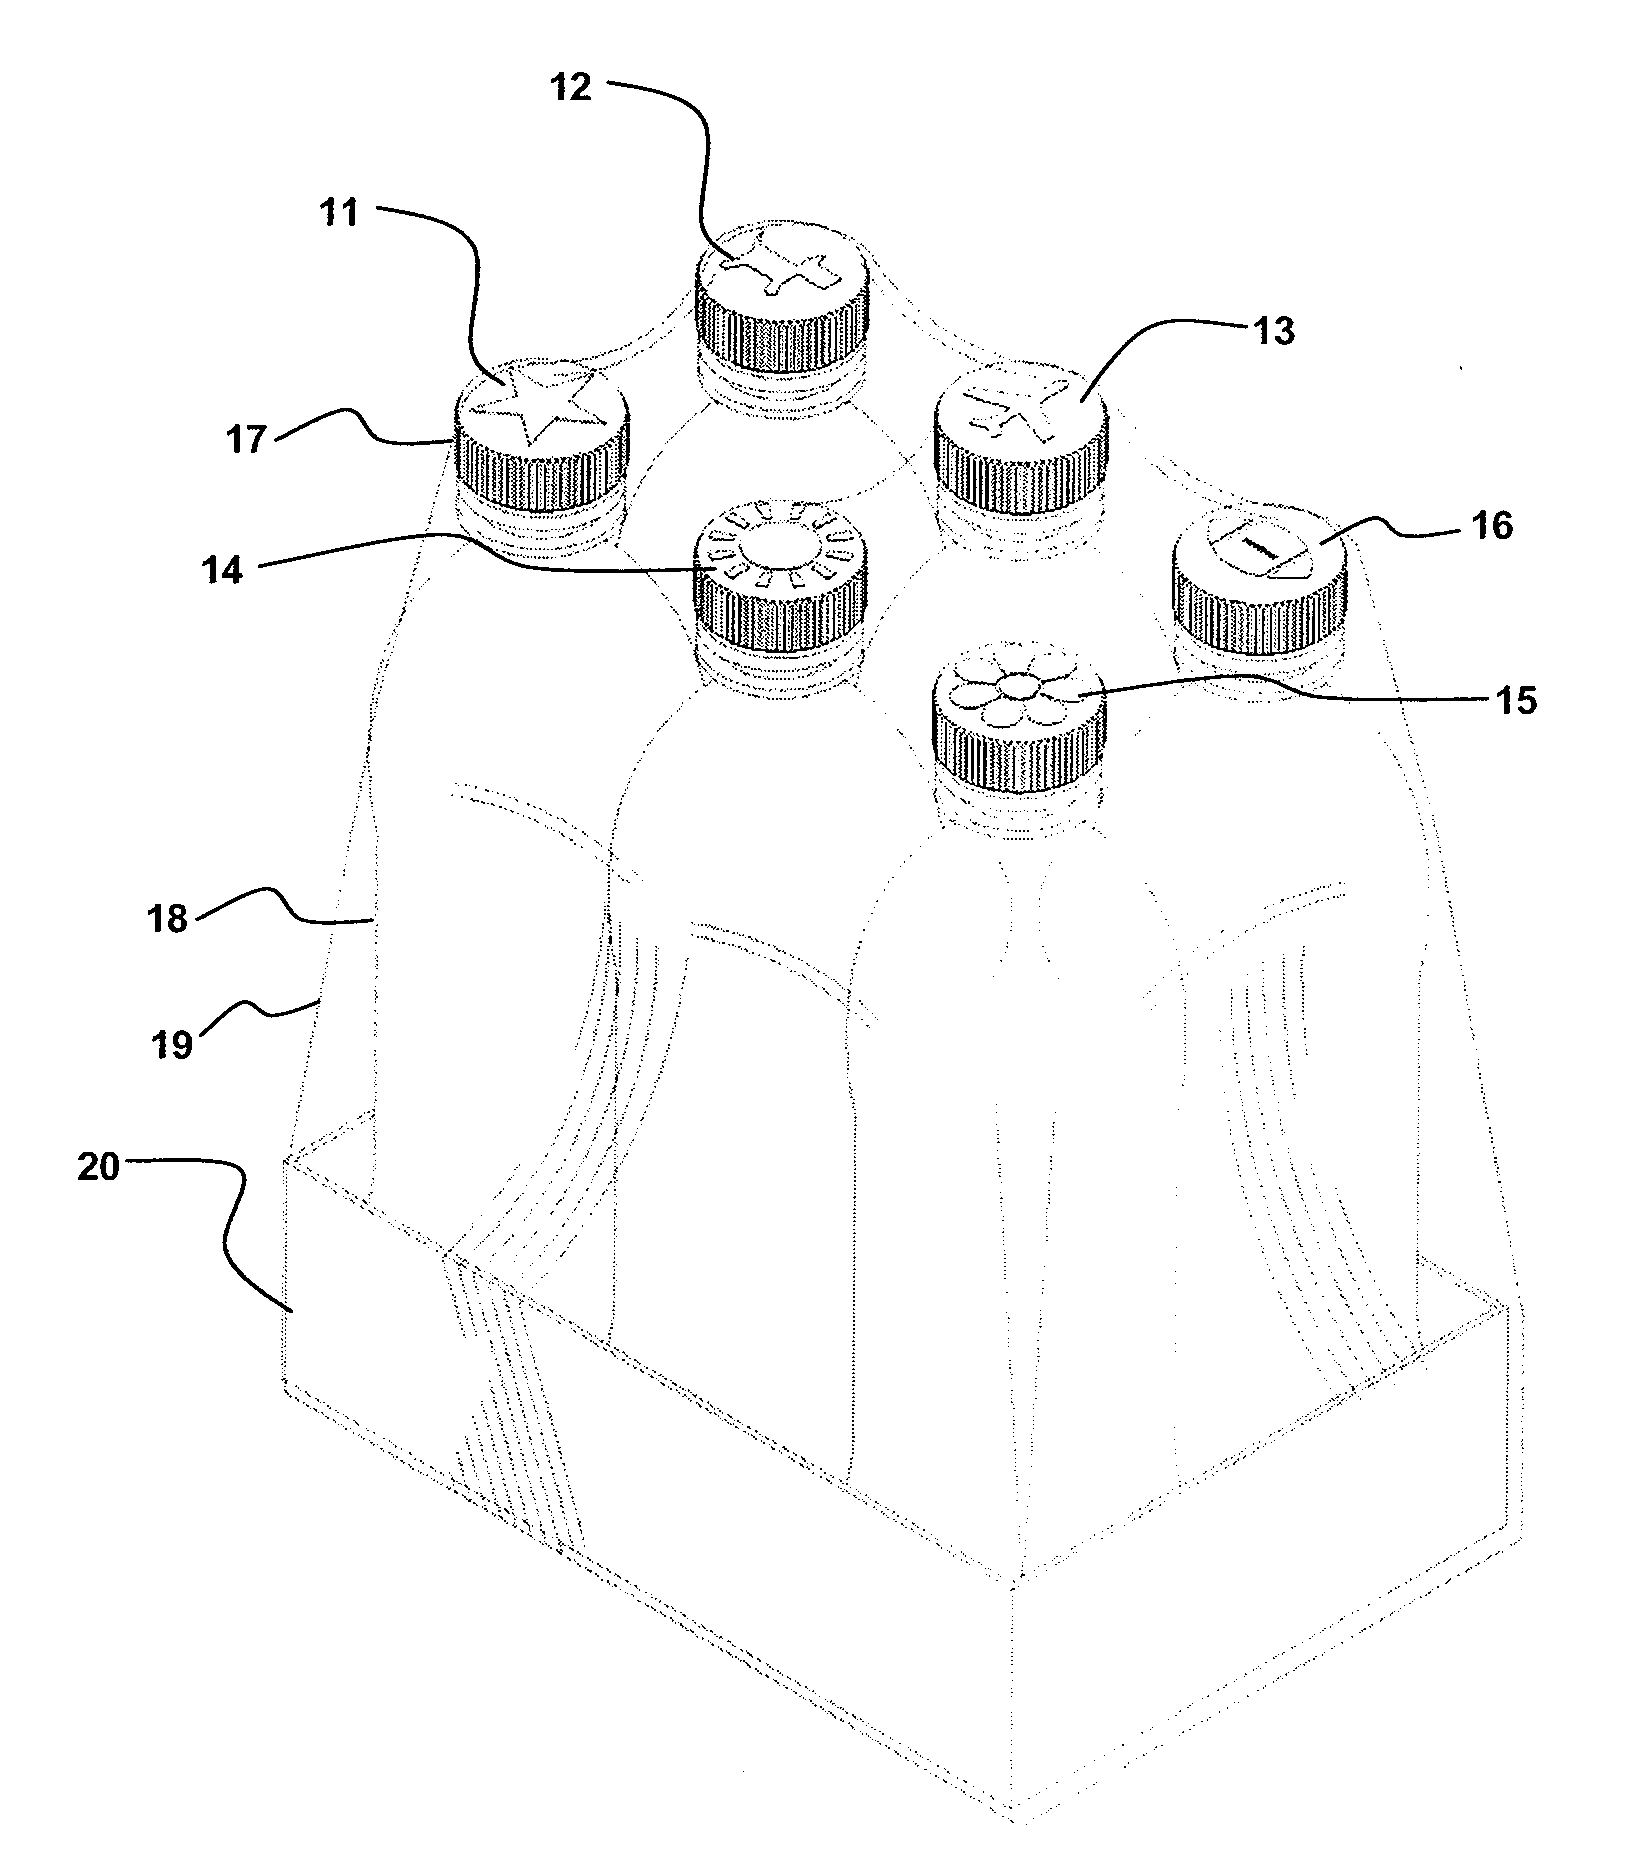 Package of identifiable beverage containers